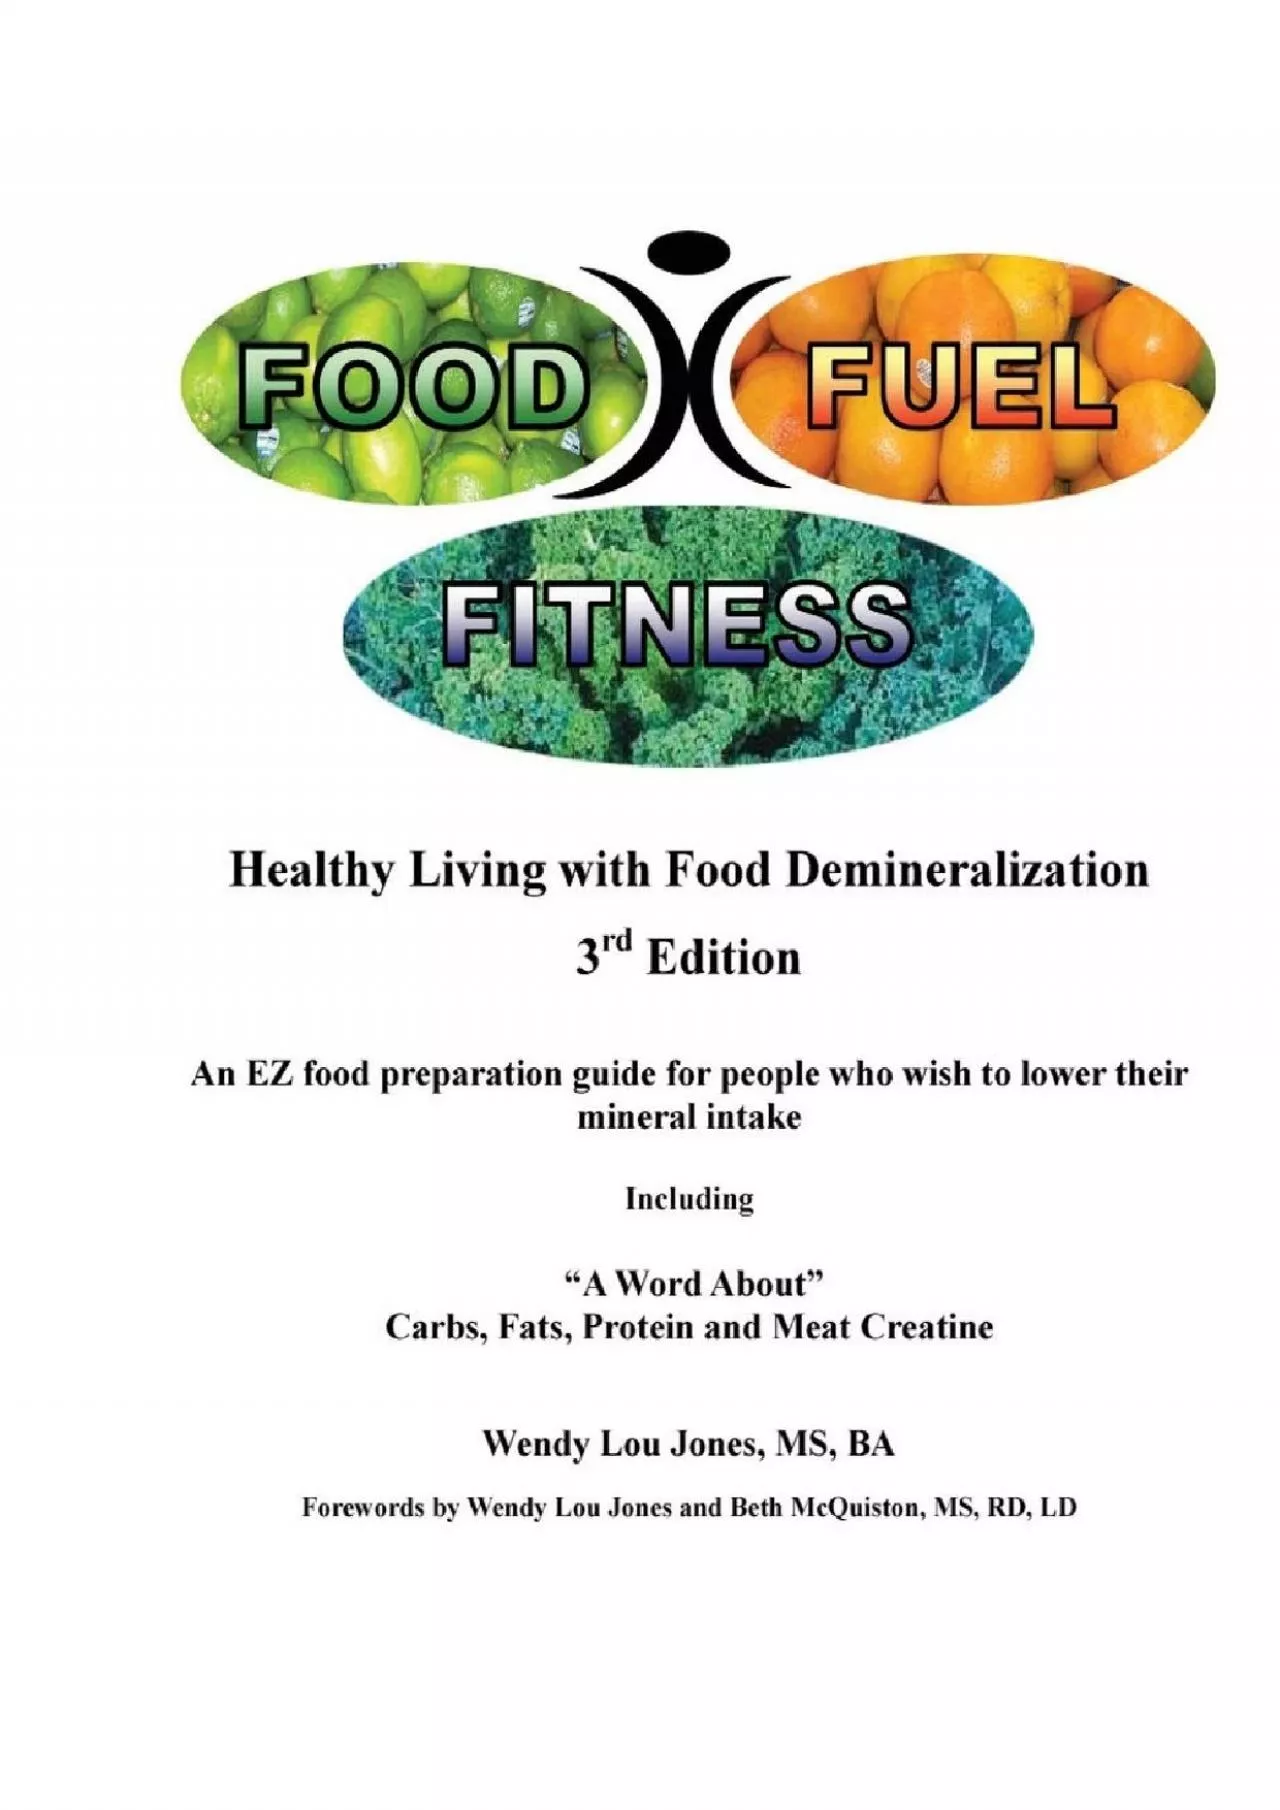 (DOWNLOAD)-Food - Fuel - Fitness -- 3rd Edition